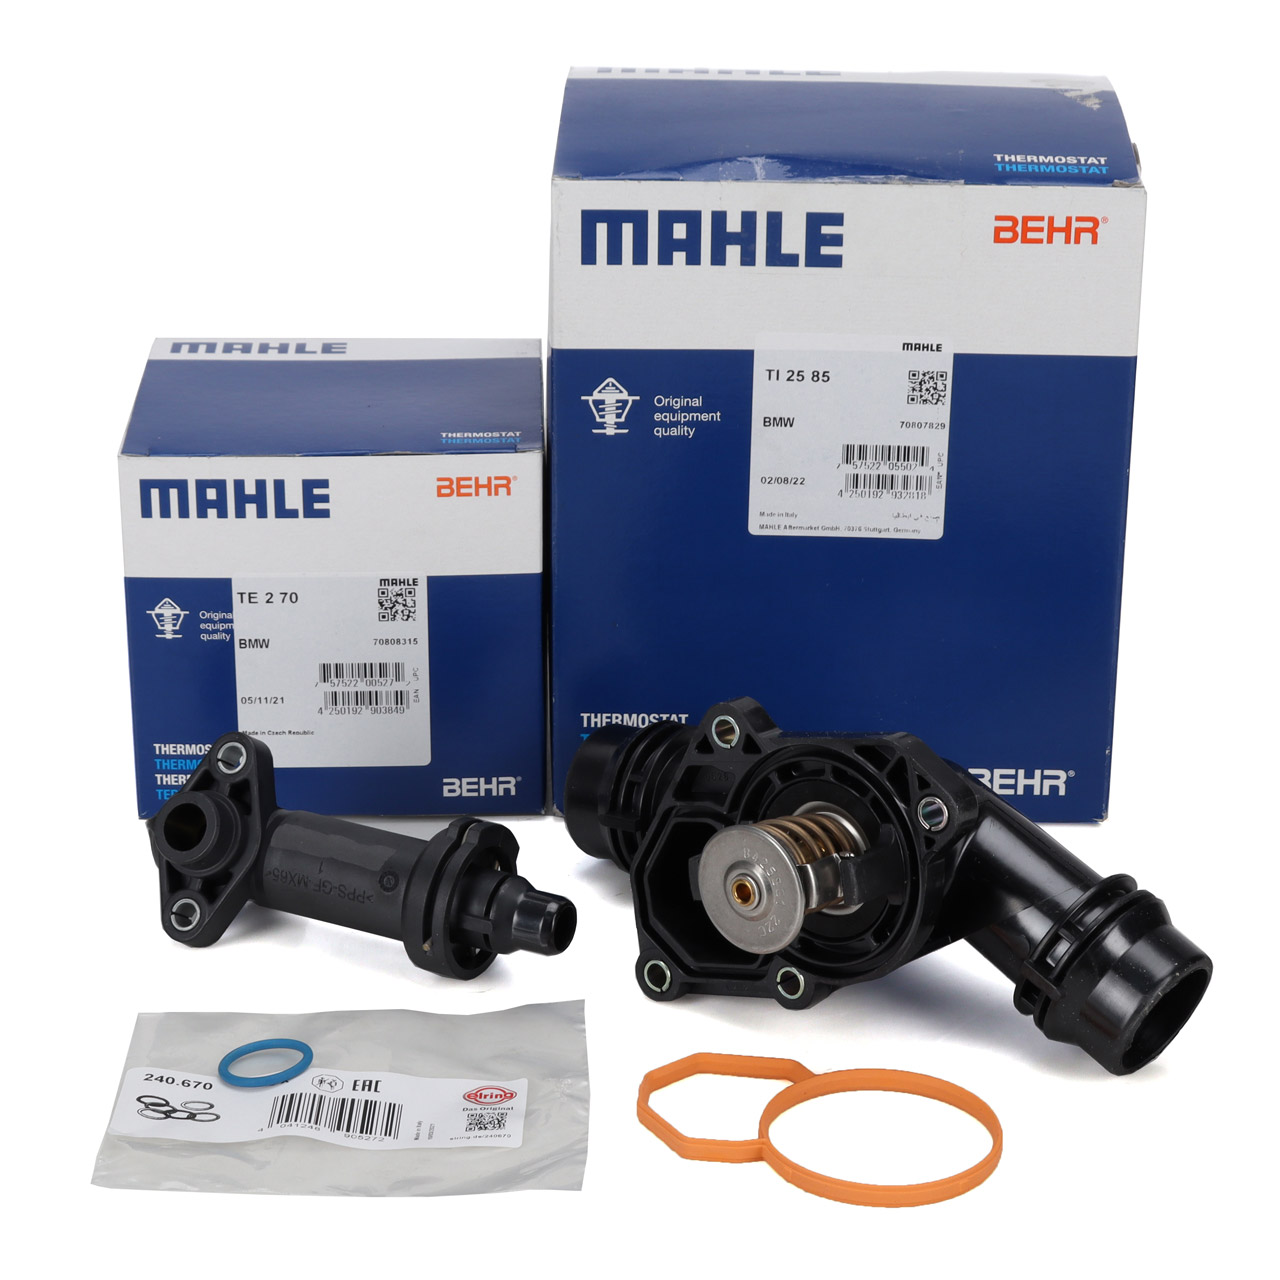 BEHR MAHLE TI2585 + TE27 Thermostat + Gehäuse + AGR Thermostat BMW E46 E39 20d 136 PS M47